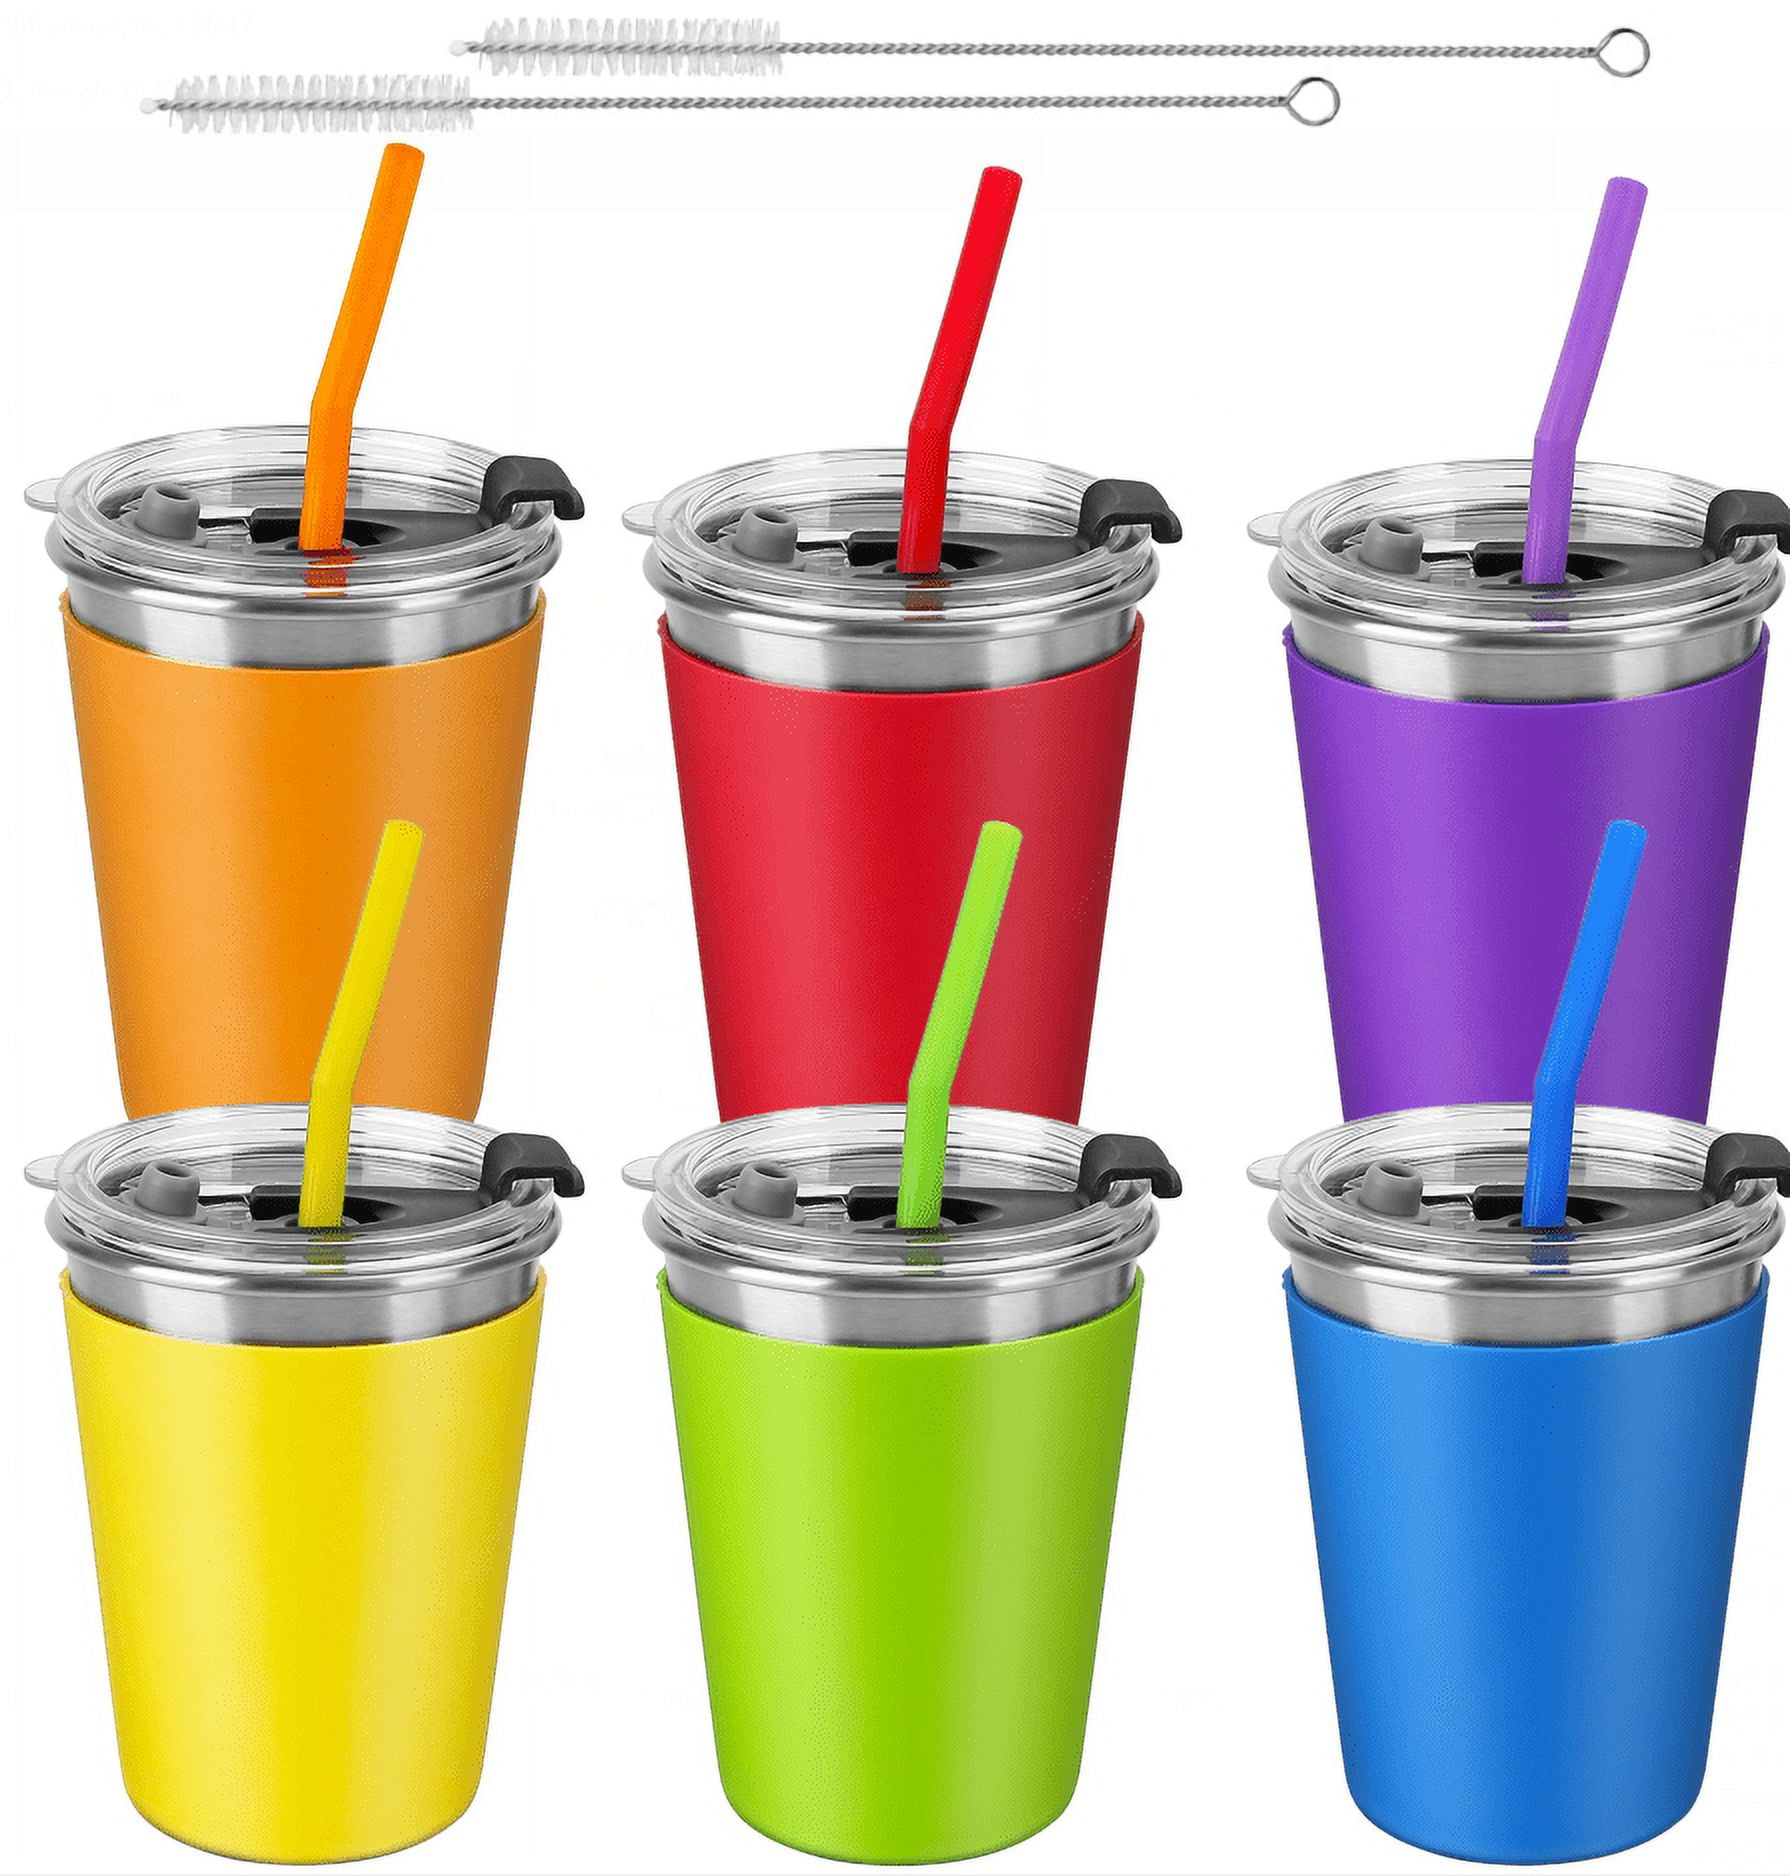 SSAWcasa Spill Proof Cups for Kids, Stainless Steel Kids Cups  with Straws Lids, 6 Pack 12oz Unbreakable Toddler Tumbler Baby Water  Drinking Glasses, Reusable Metal Smoothie Sippy Mug for Child